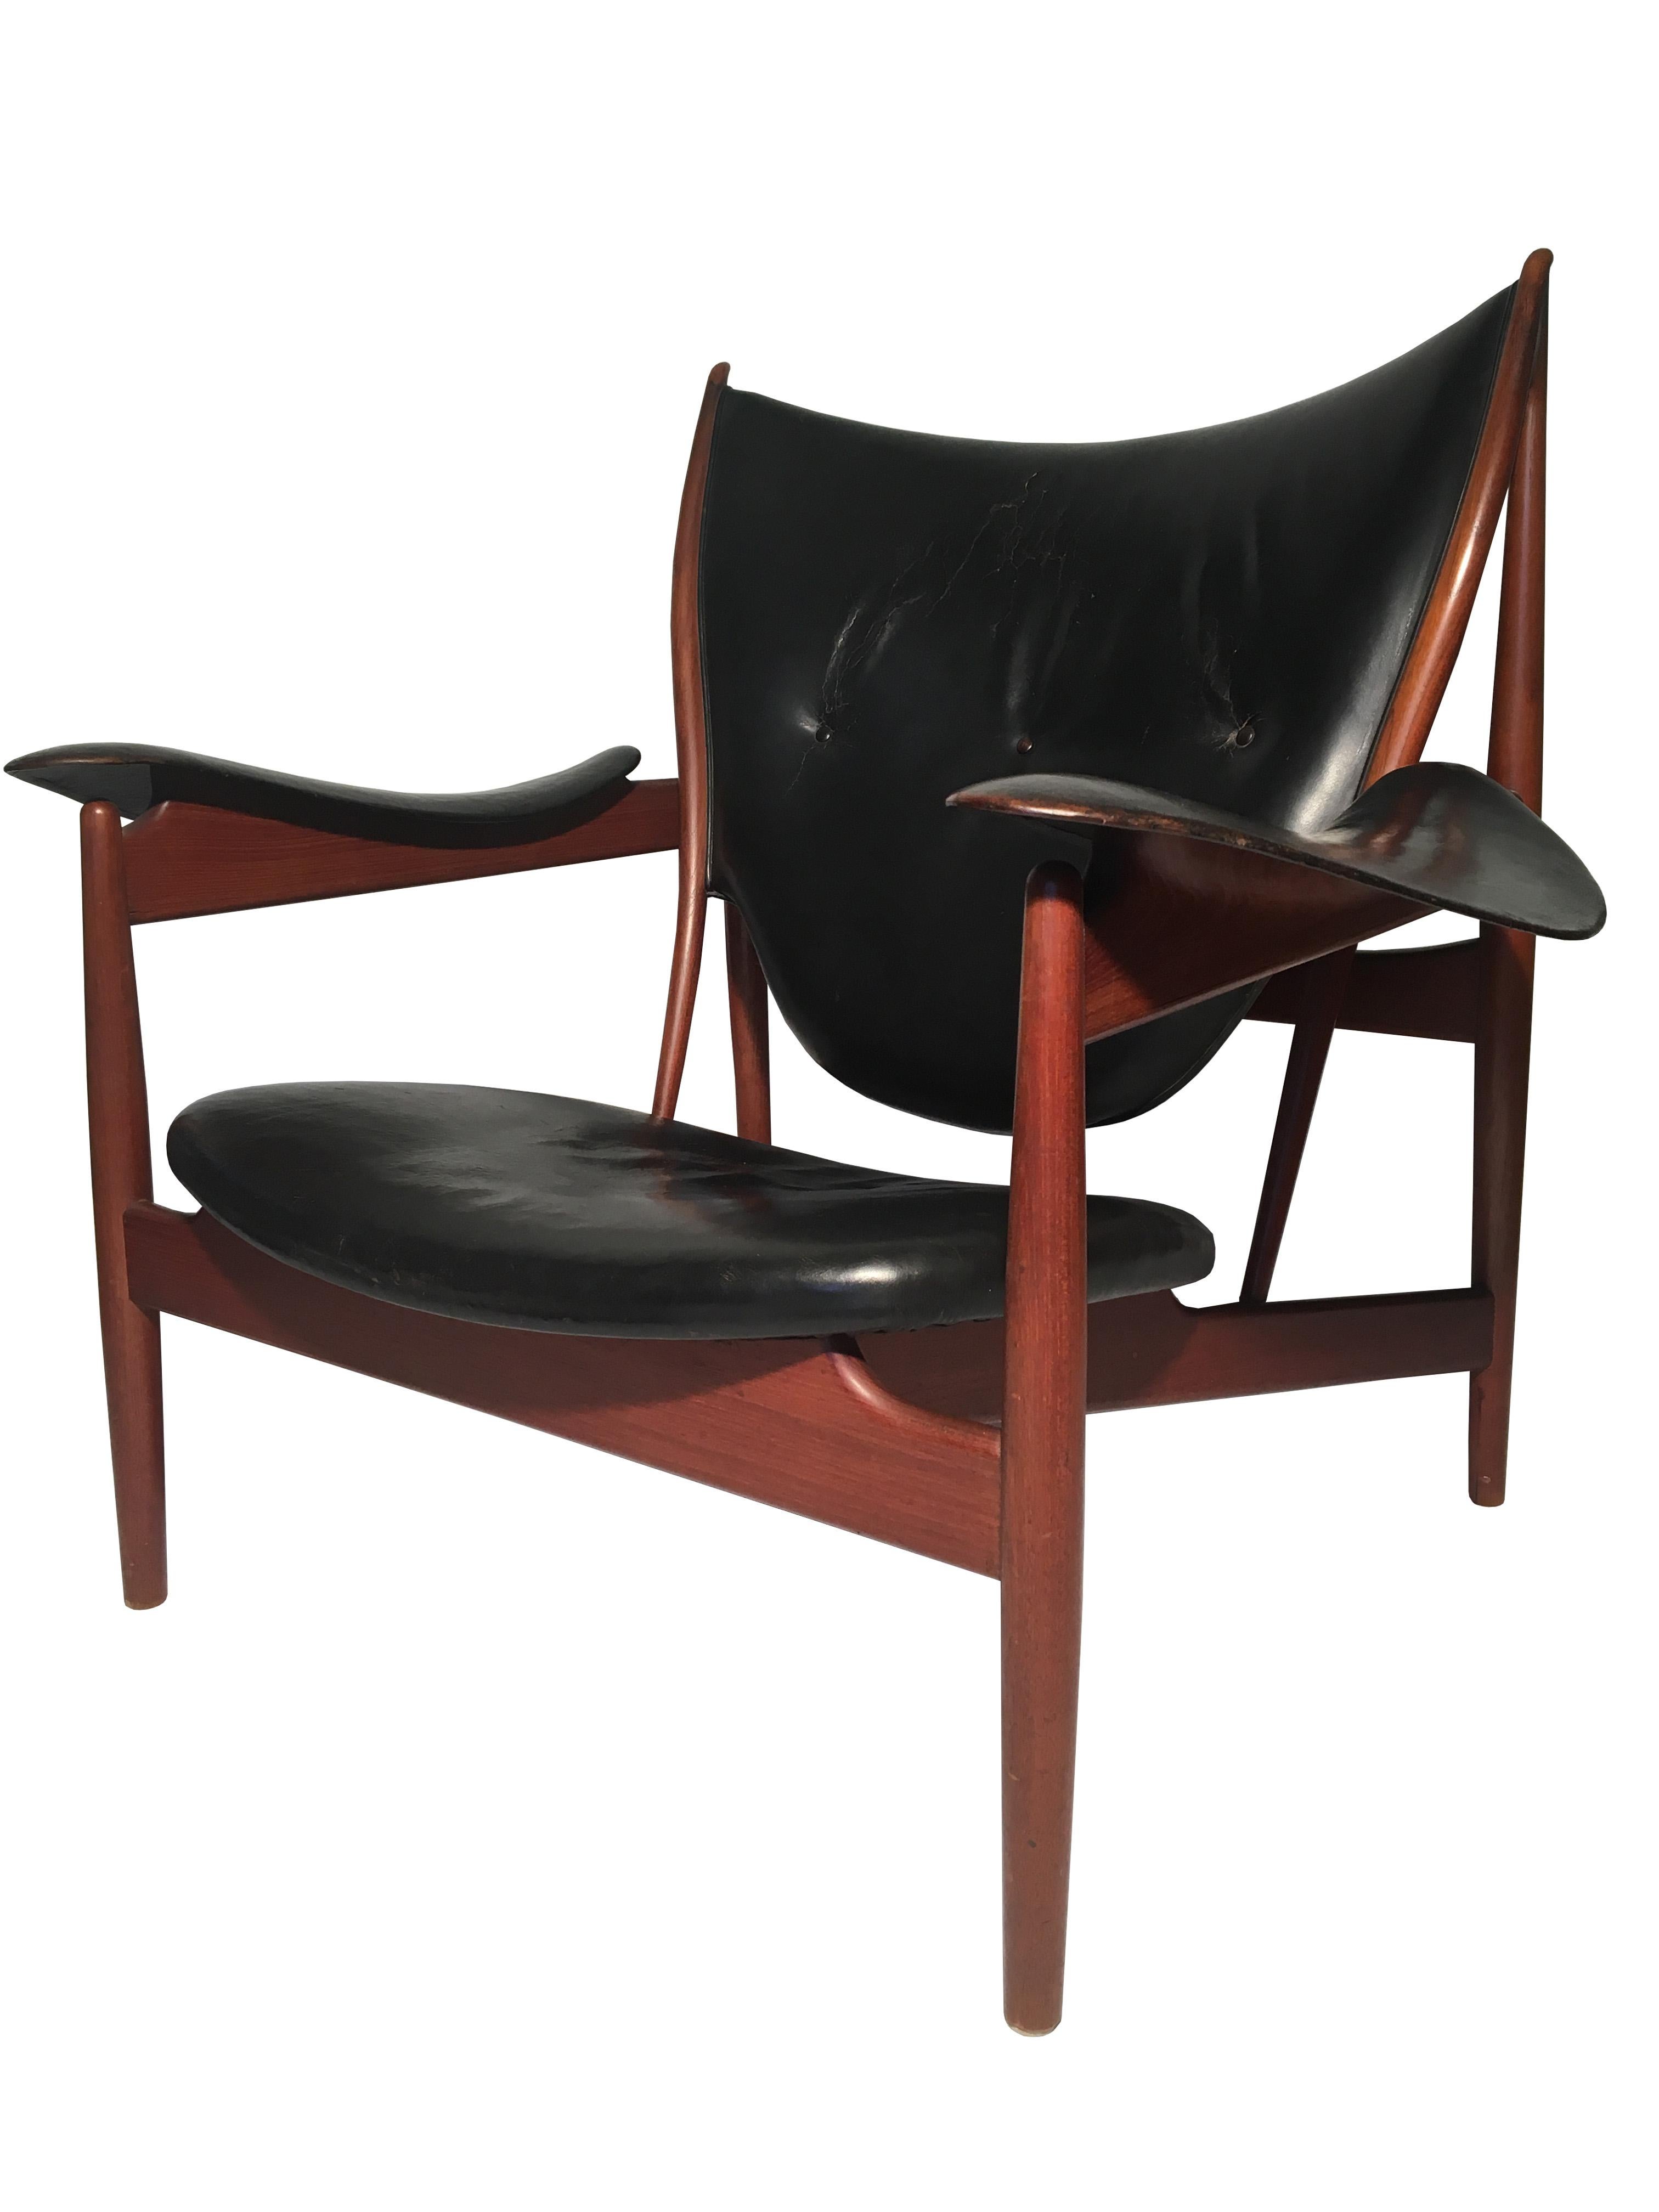 Finn Juhl Chieftain Chair for Niels Vodder in Teak and Black Leather For Sale 10